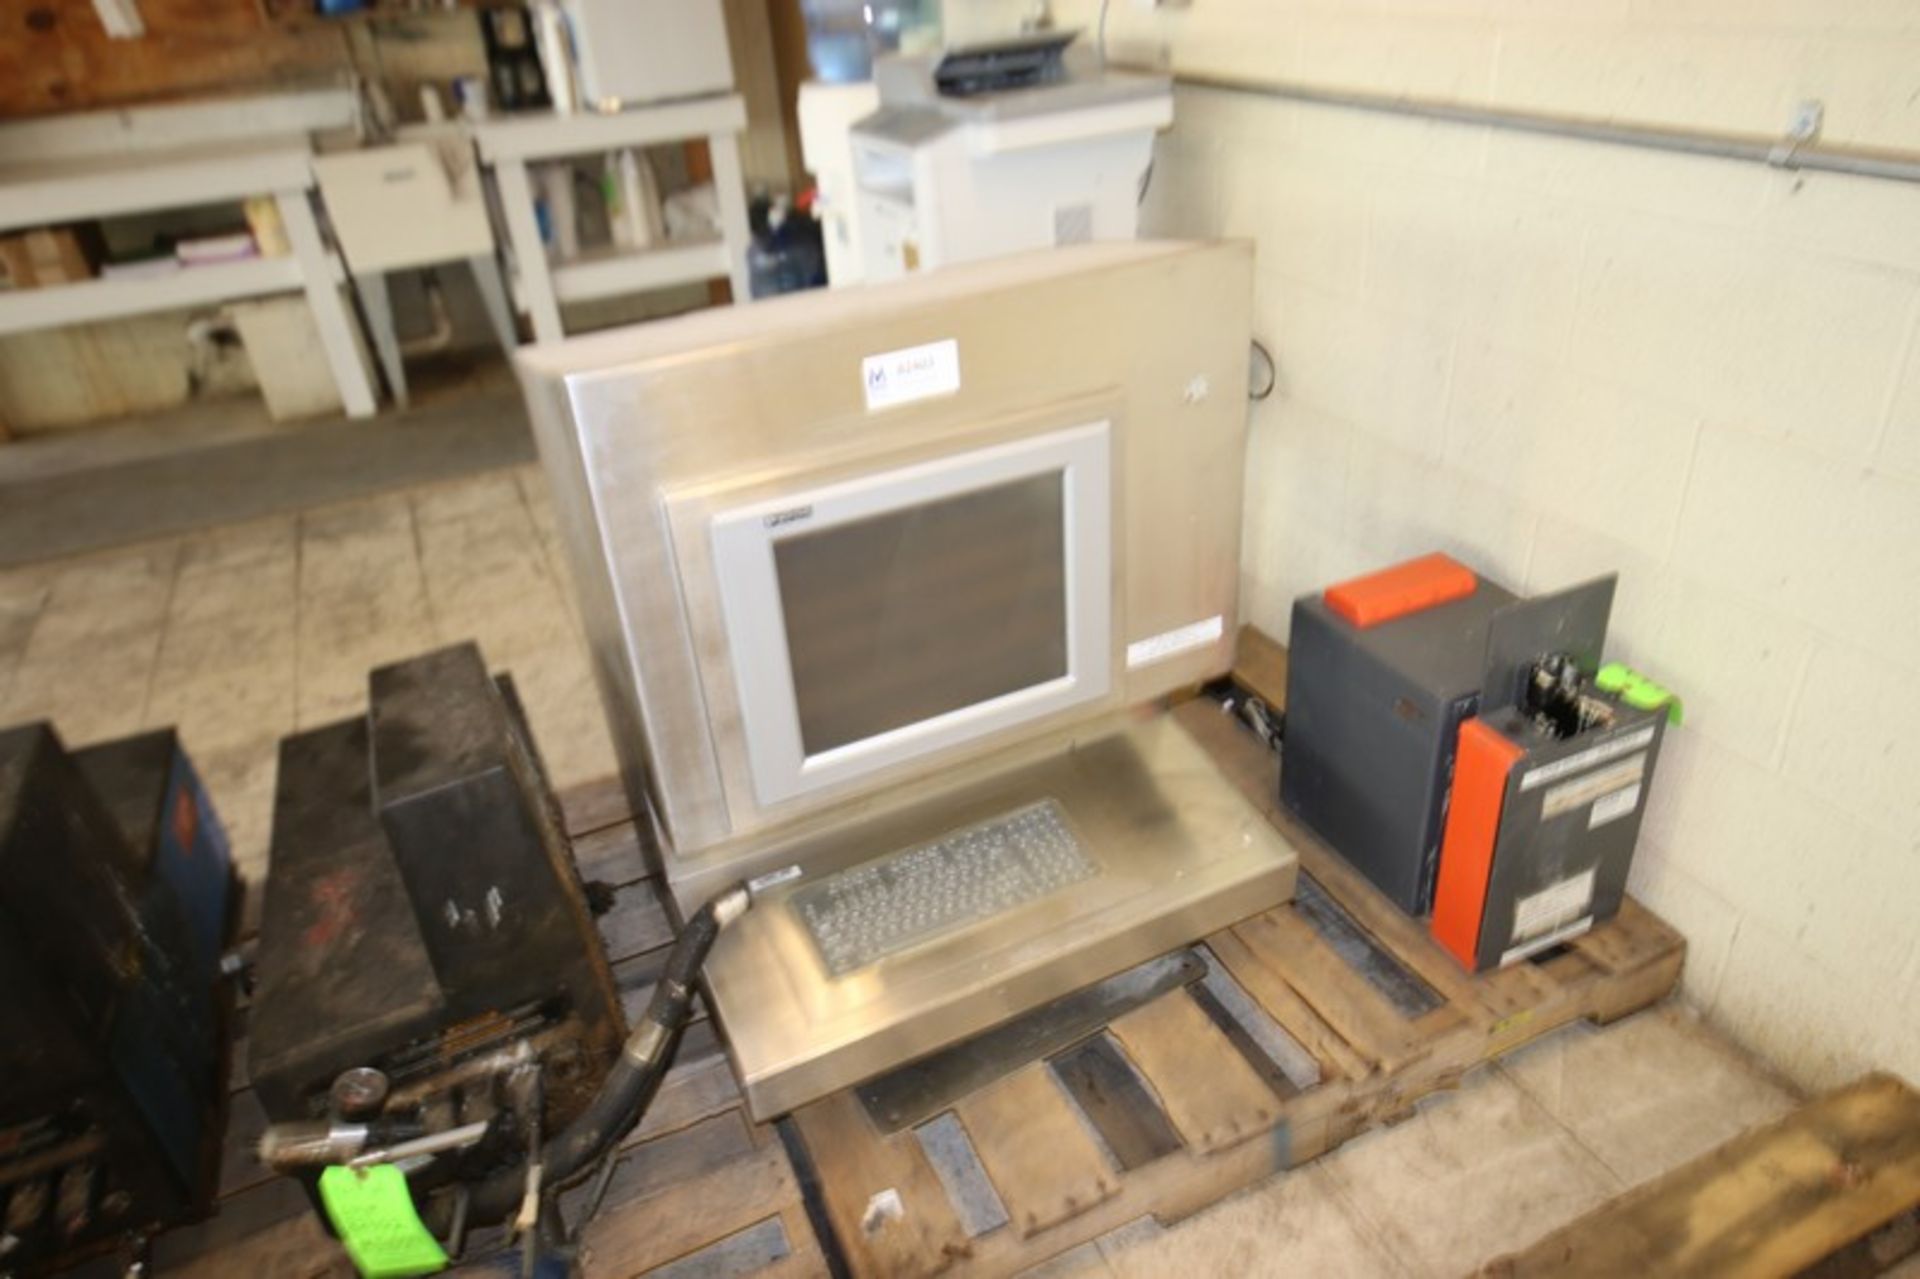 S/S Desk Top Computer Cabinet,with Phoenix Contact Monitor & Key Board (INV#82403) (LOCATED @ MDG